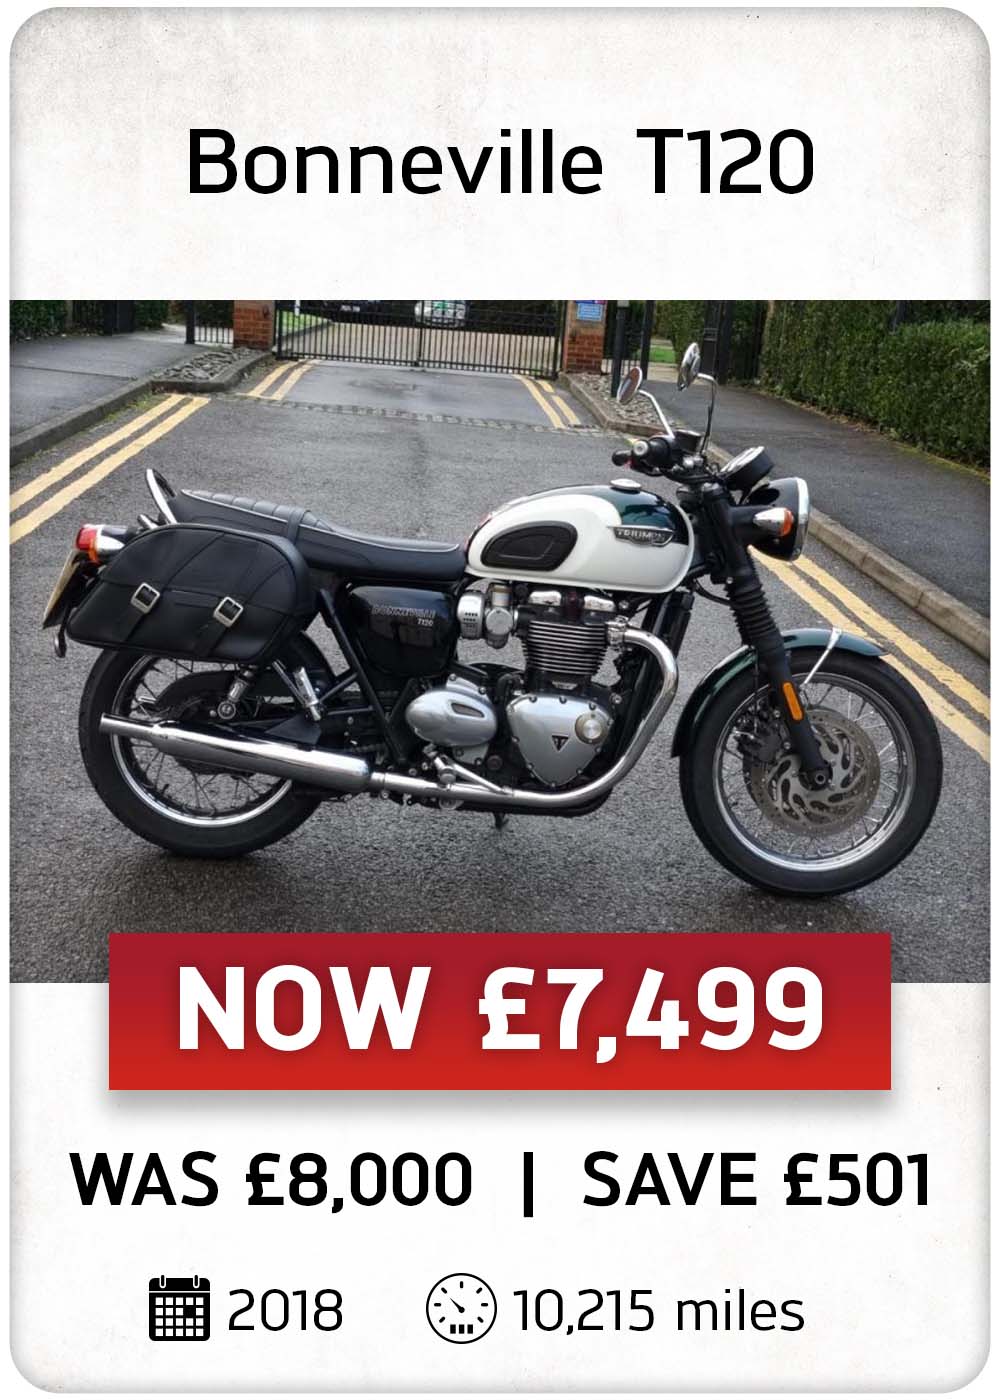 Triumph BONNEVILLE T120 for sale in our Used Bike Specials at Laguna Motorcycles in Maidstone